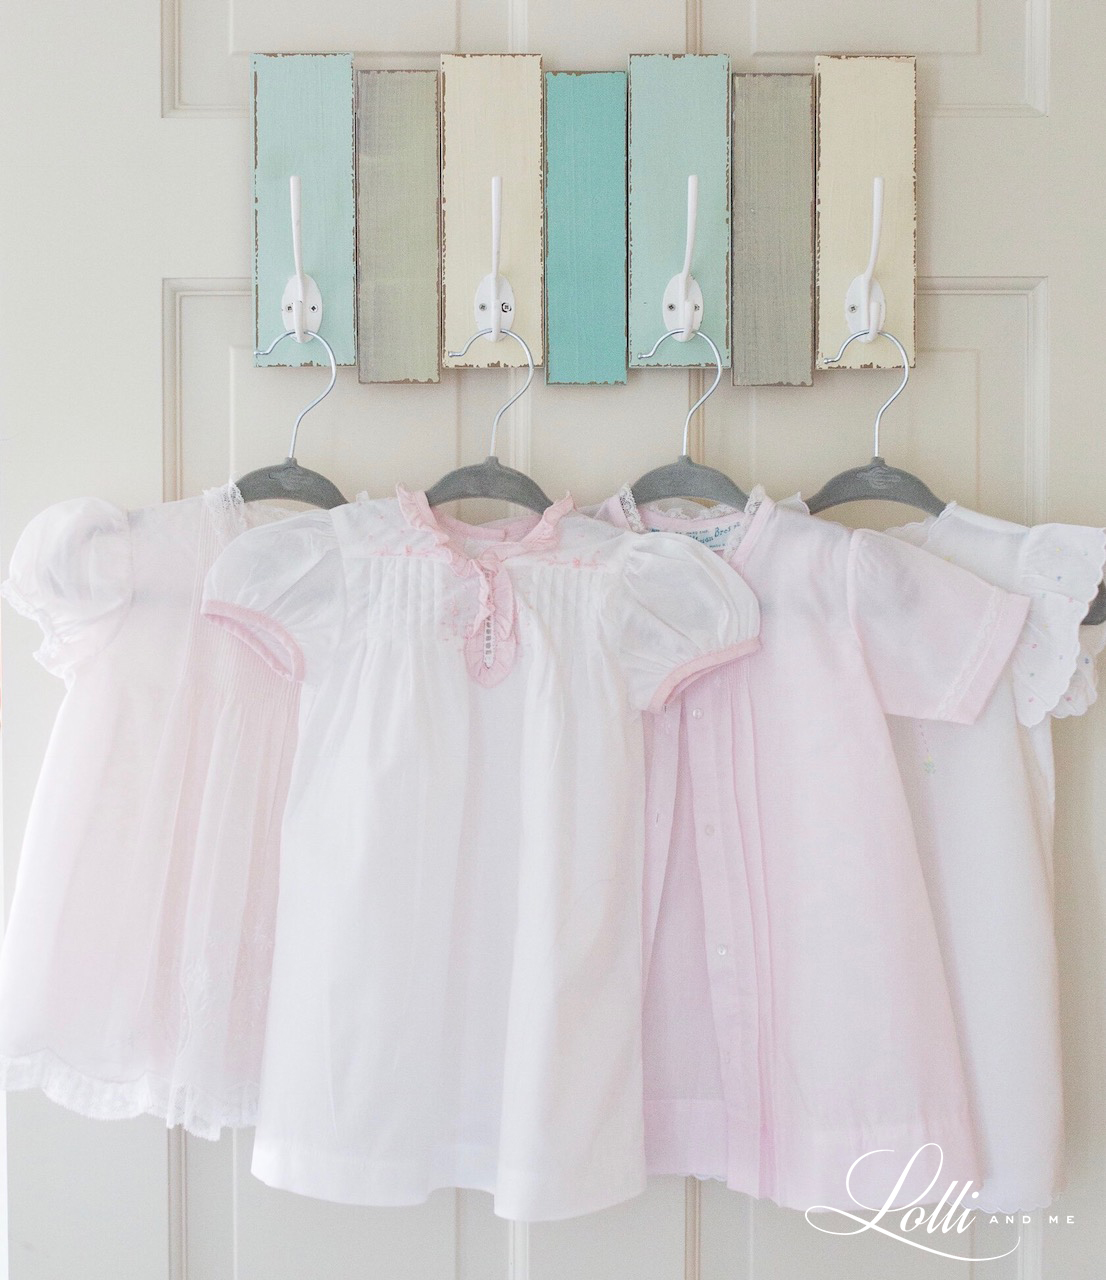 infant day gowns